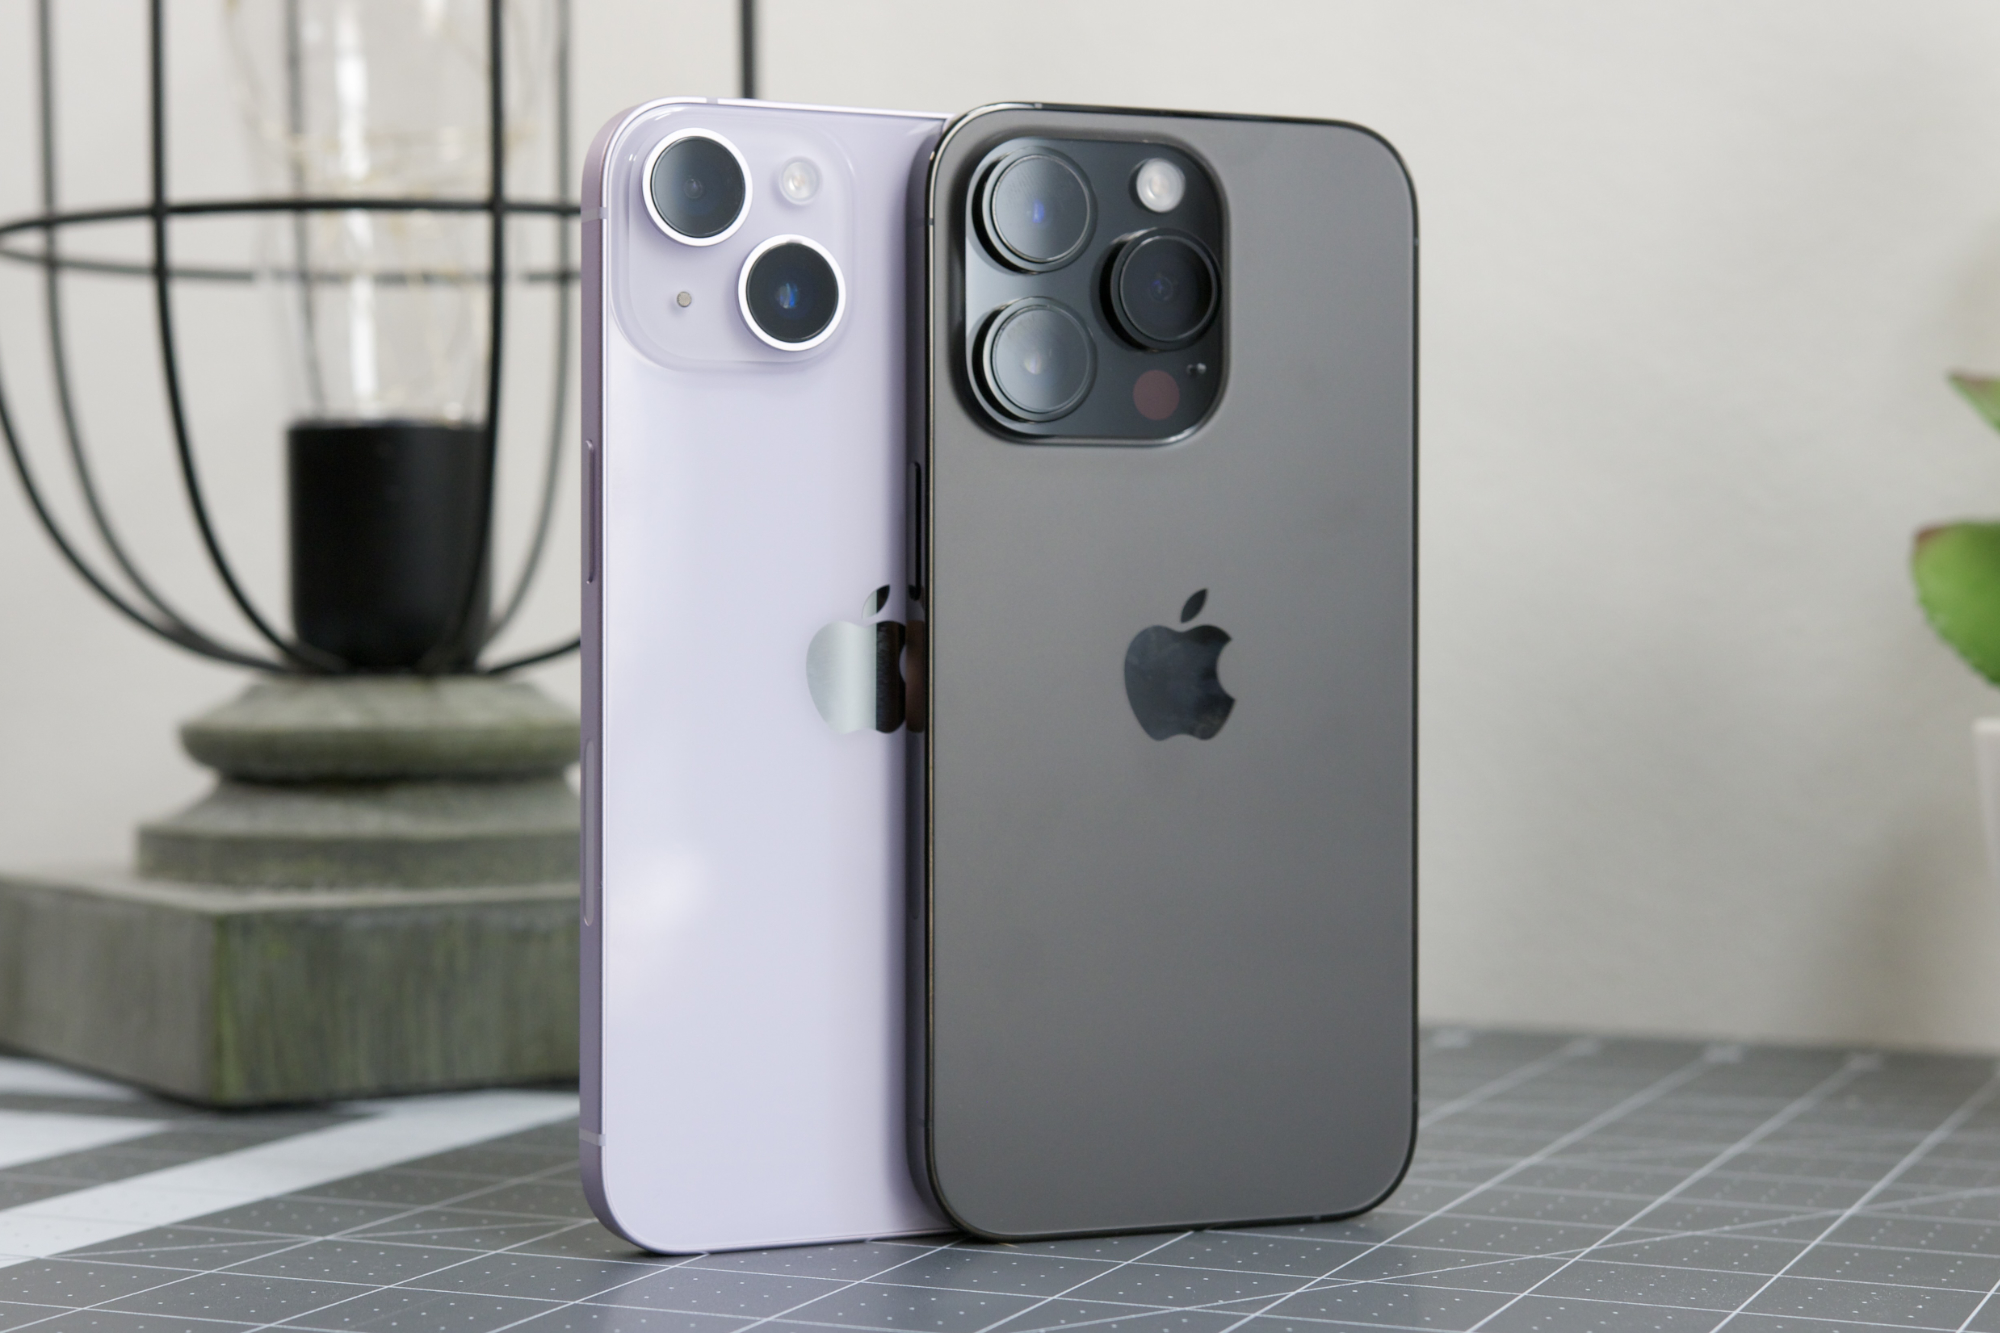 Will iPhone 14 have 3 cameras?